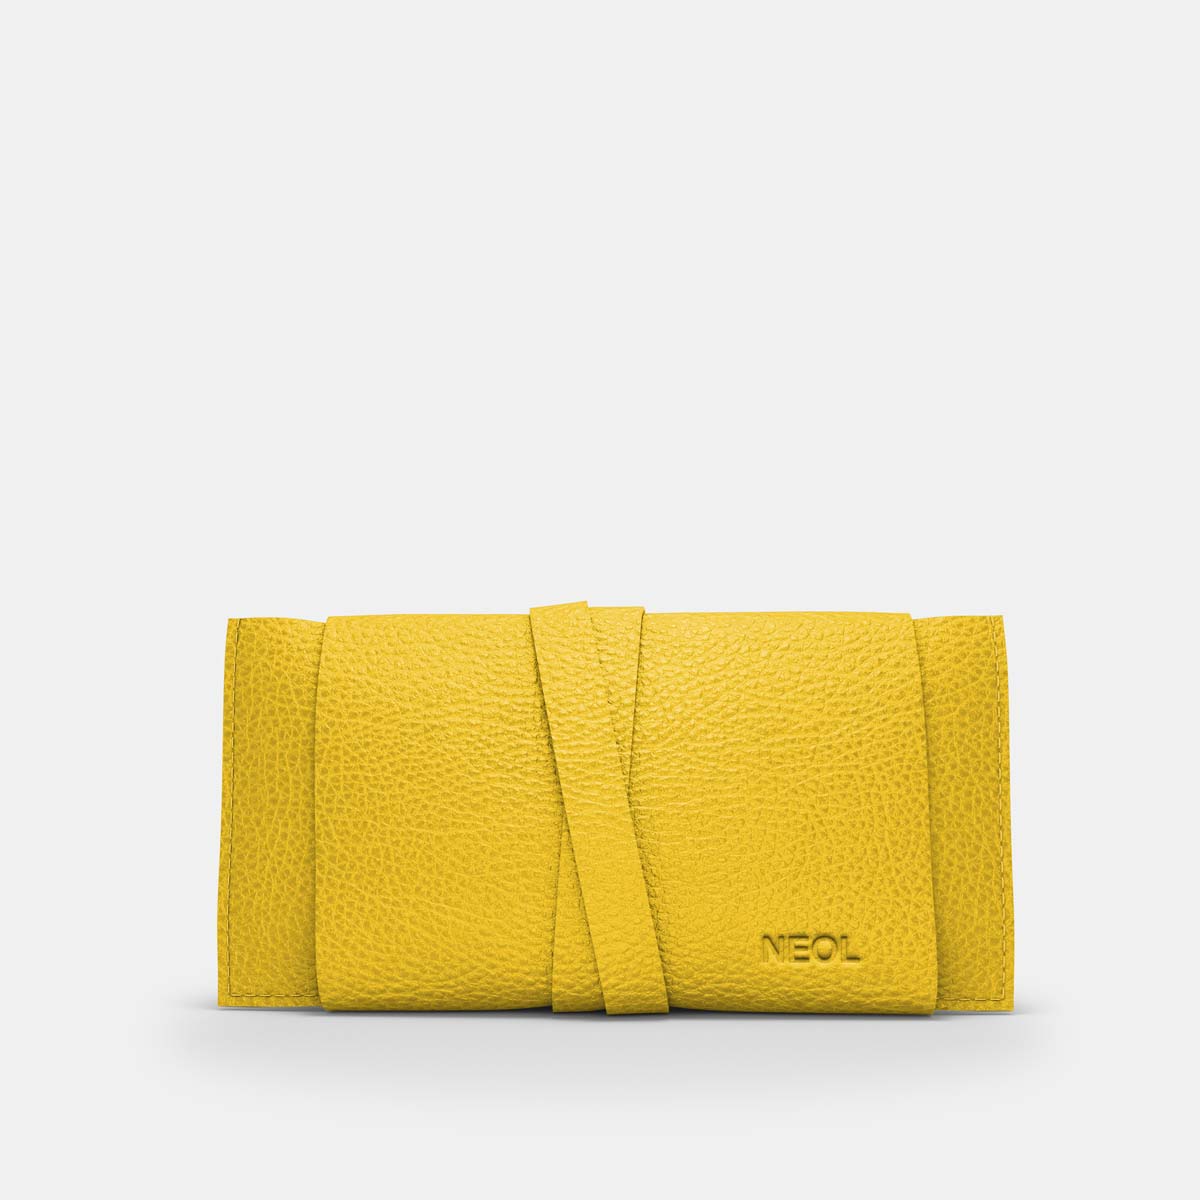 Cable Bag - Yellow and Grey